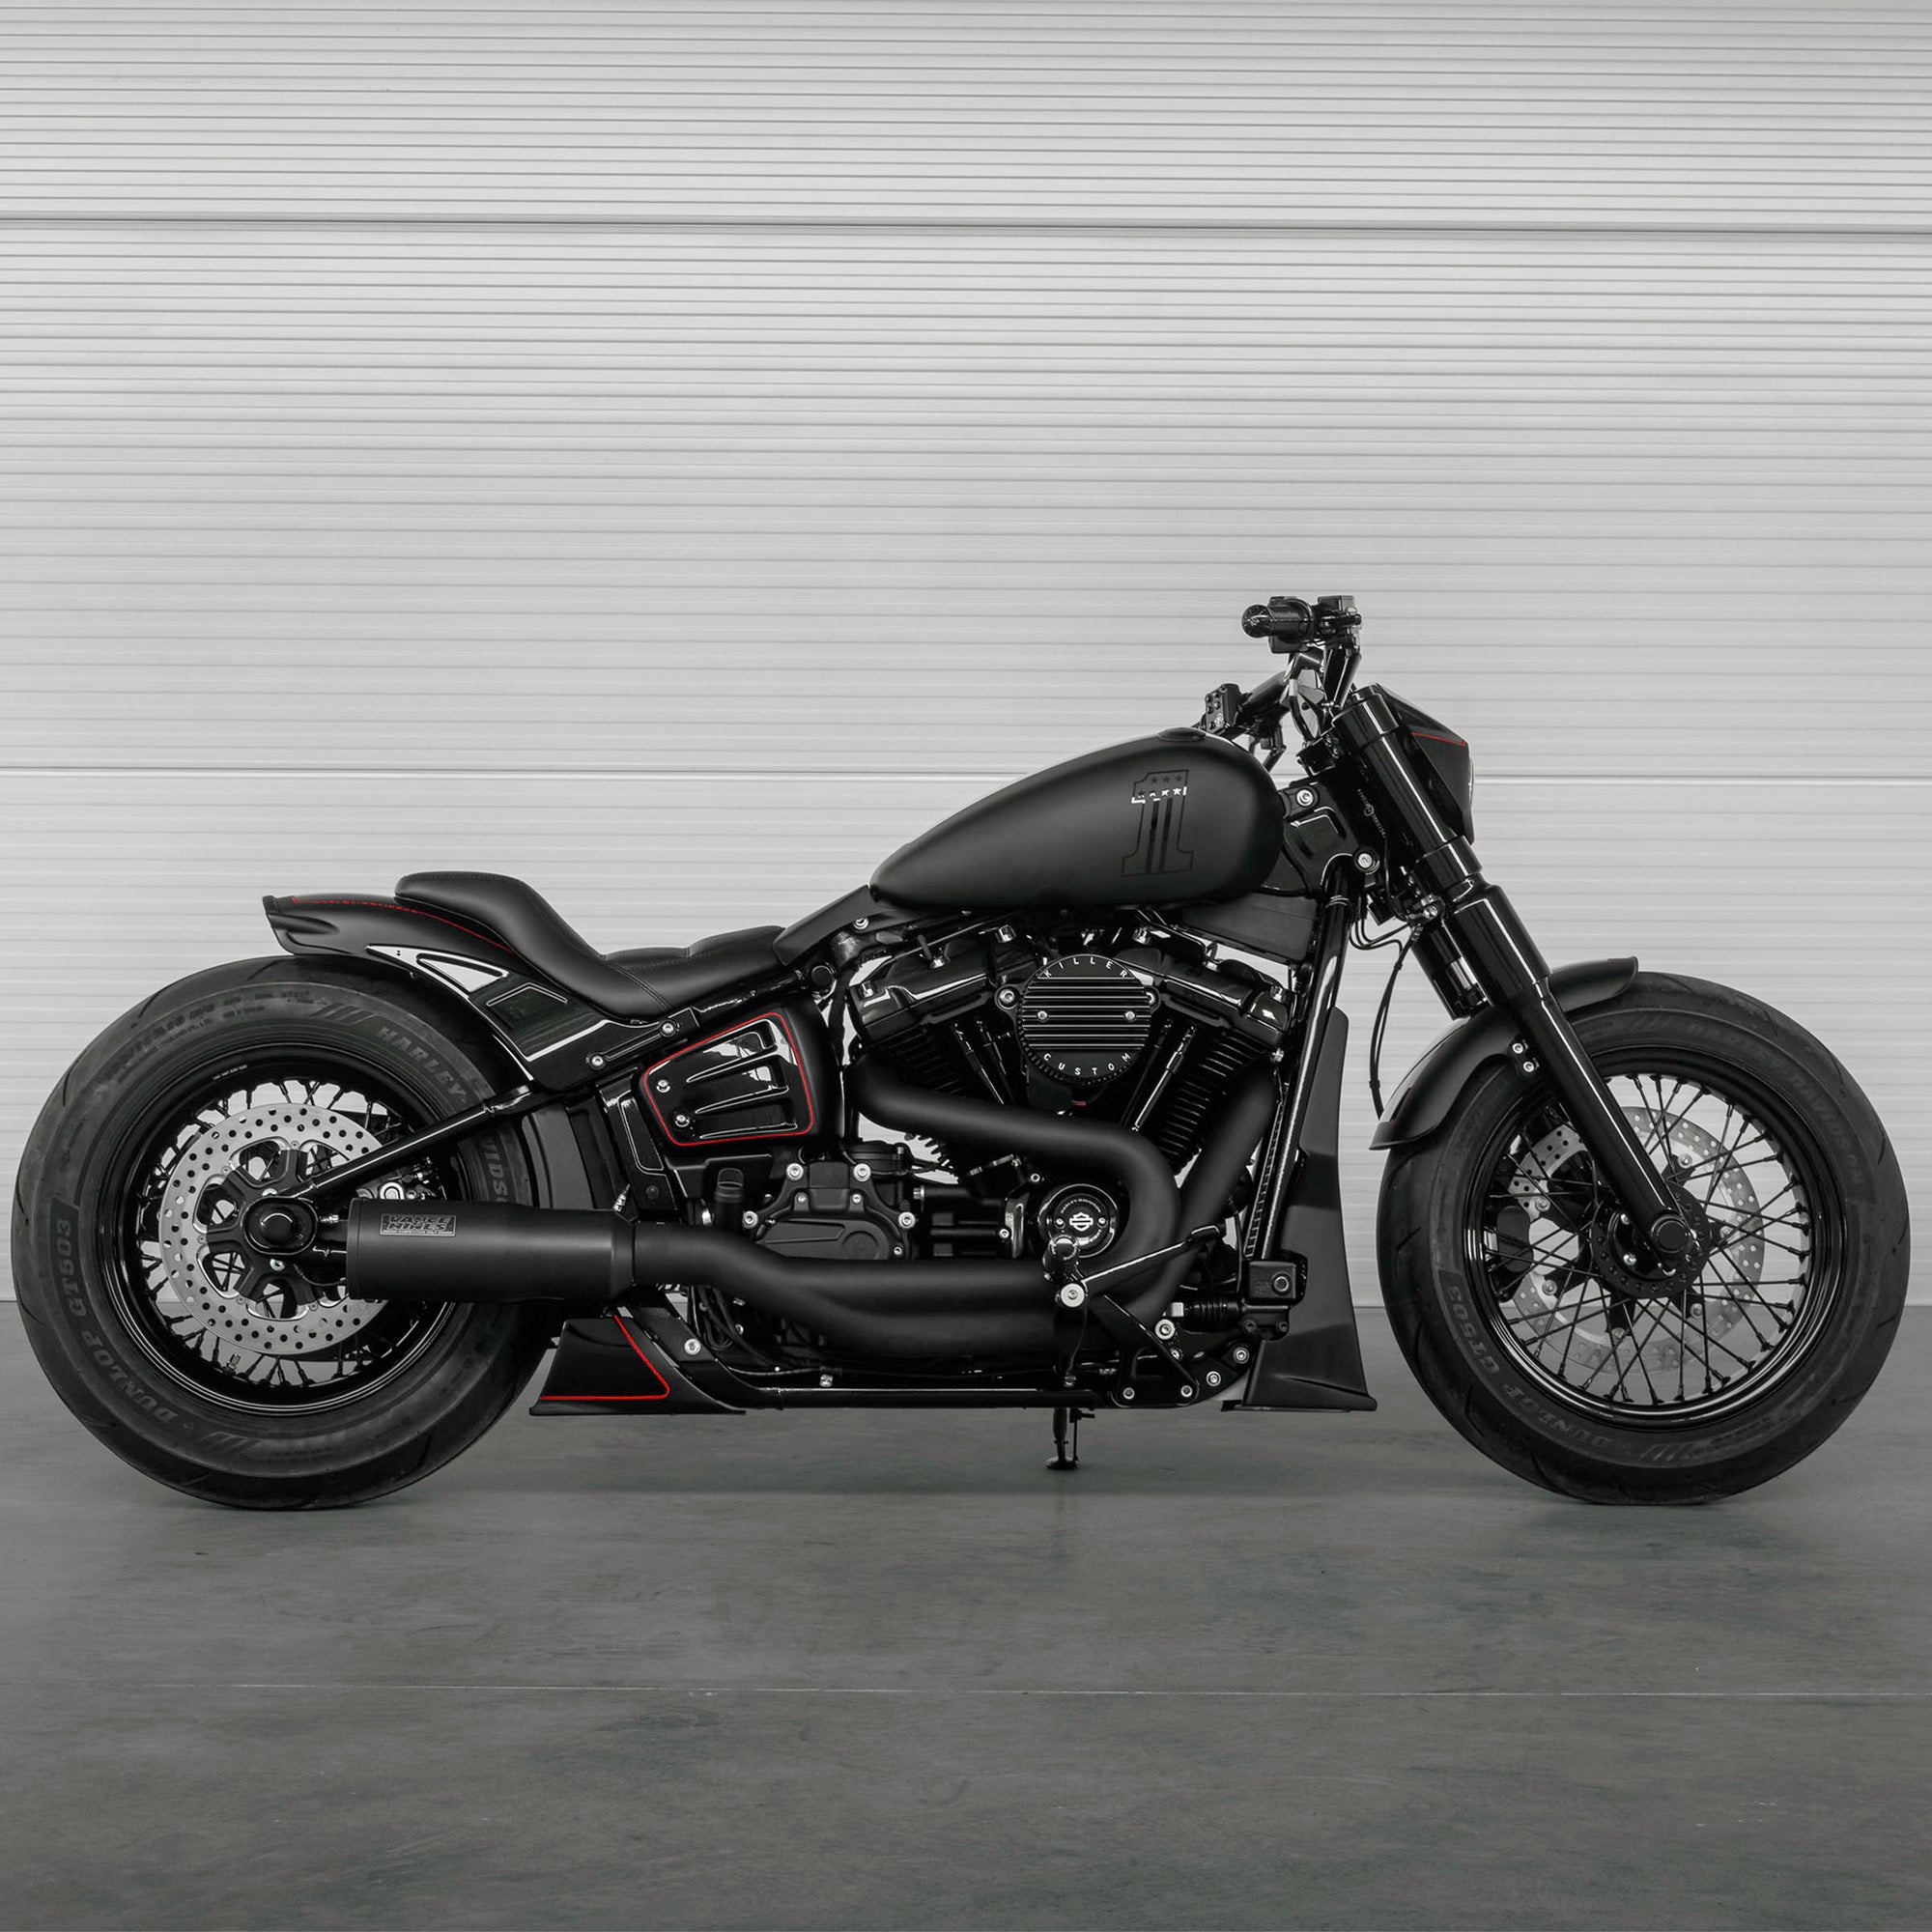 Modified Harley Davidson Softail Standard motorcycle with Killer Custom parts from the side in a modern white garage